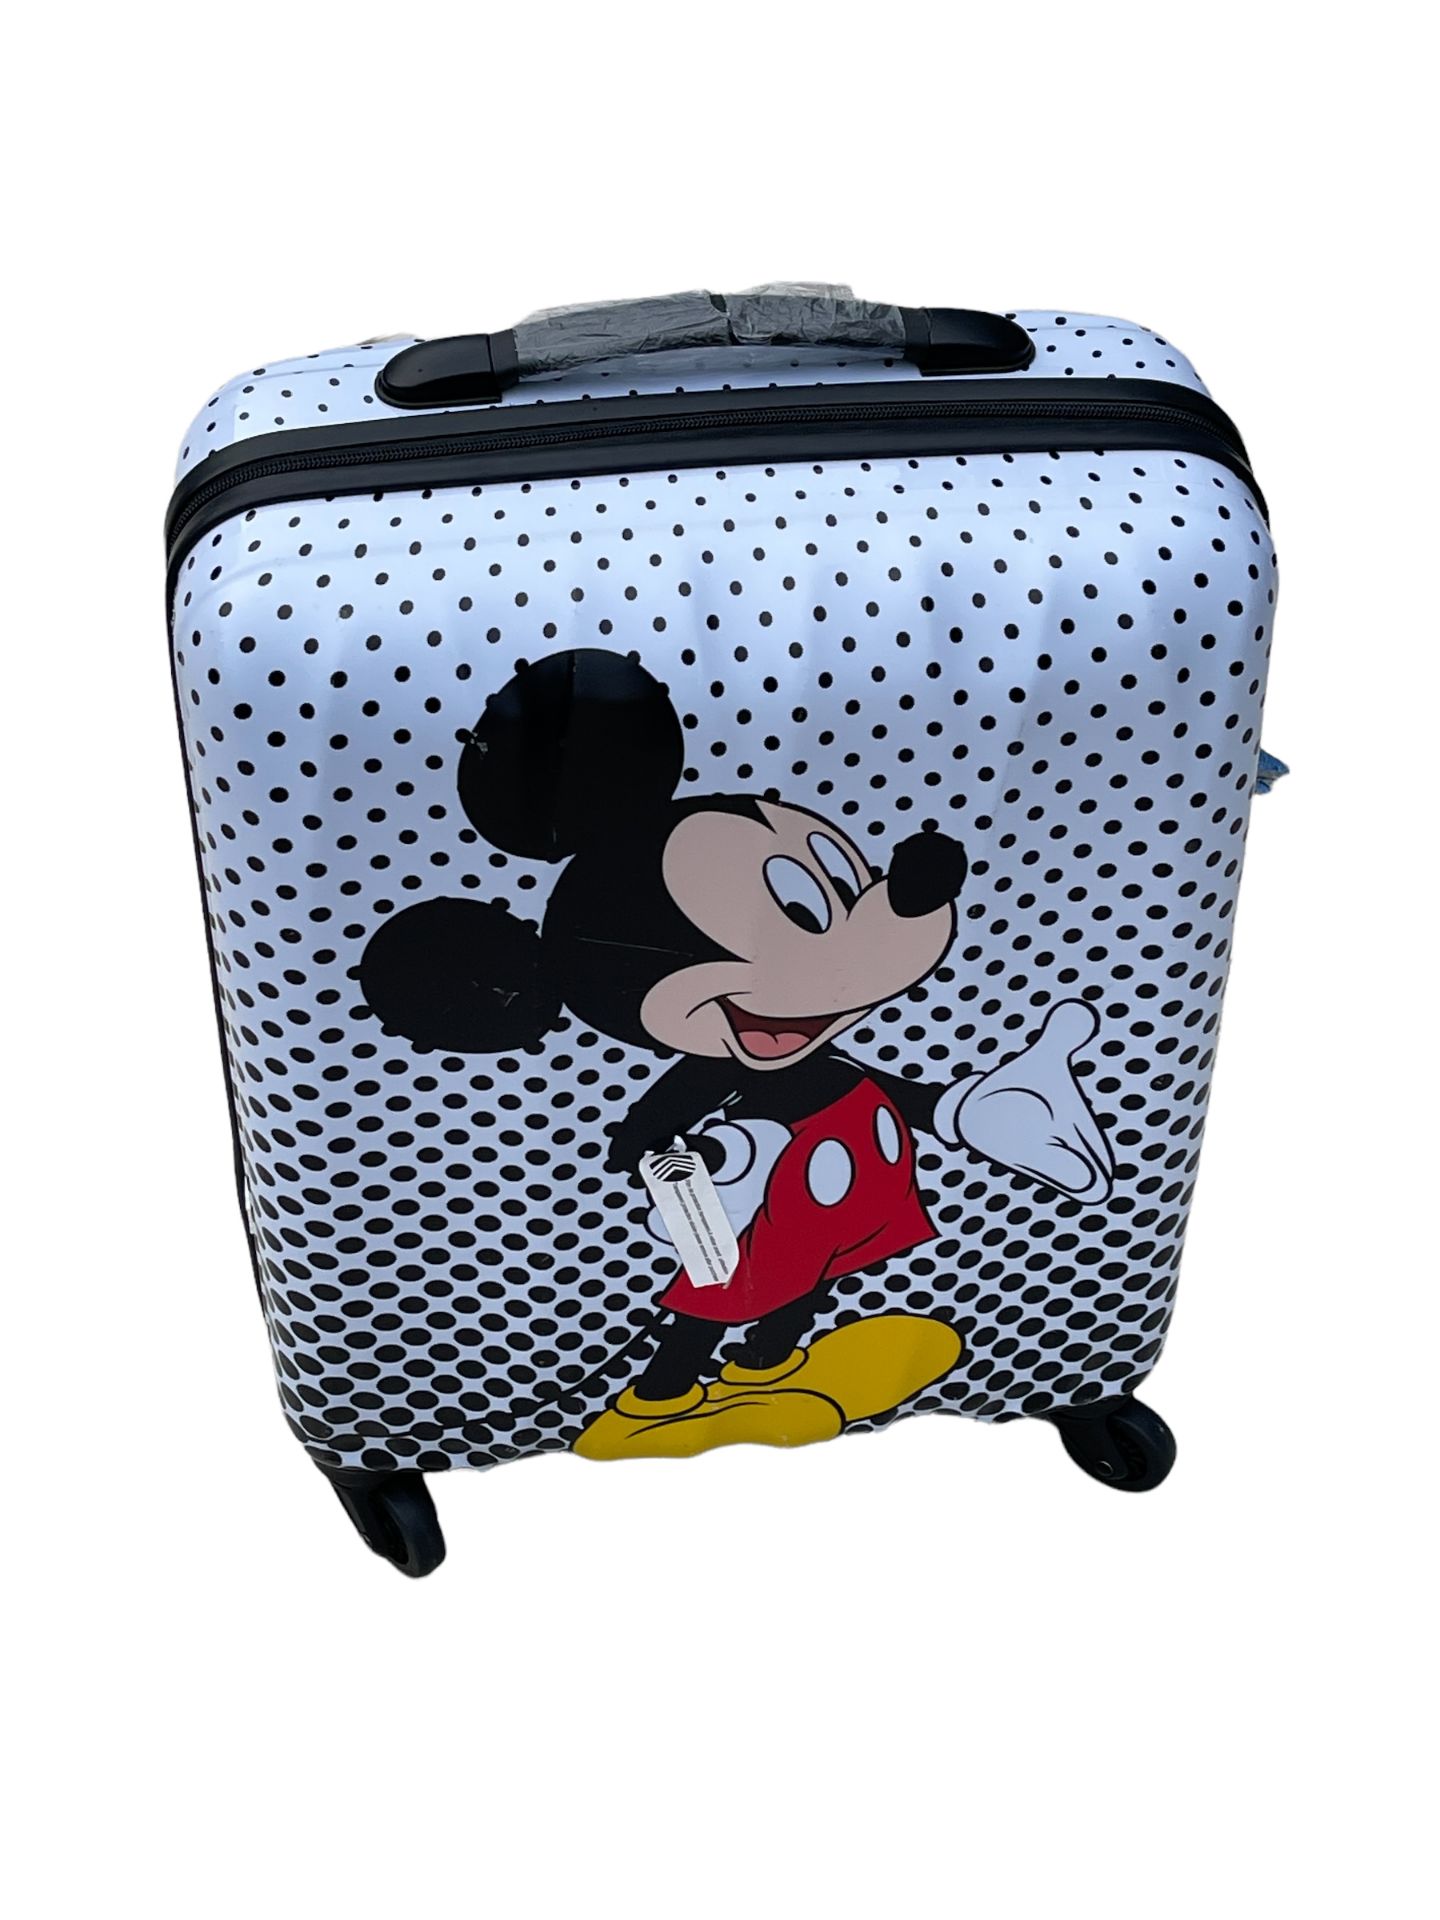 American Tourister Disney Mickey Mouse Polka Dot Carry-on Spinner Case 55cm - RRP £145